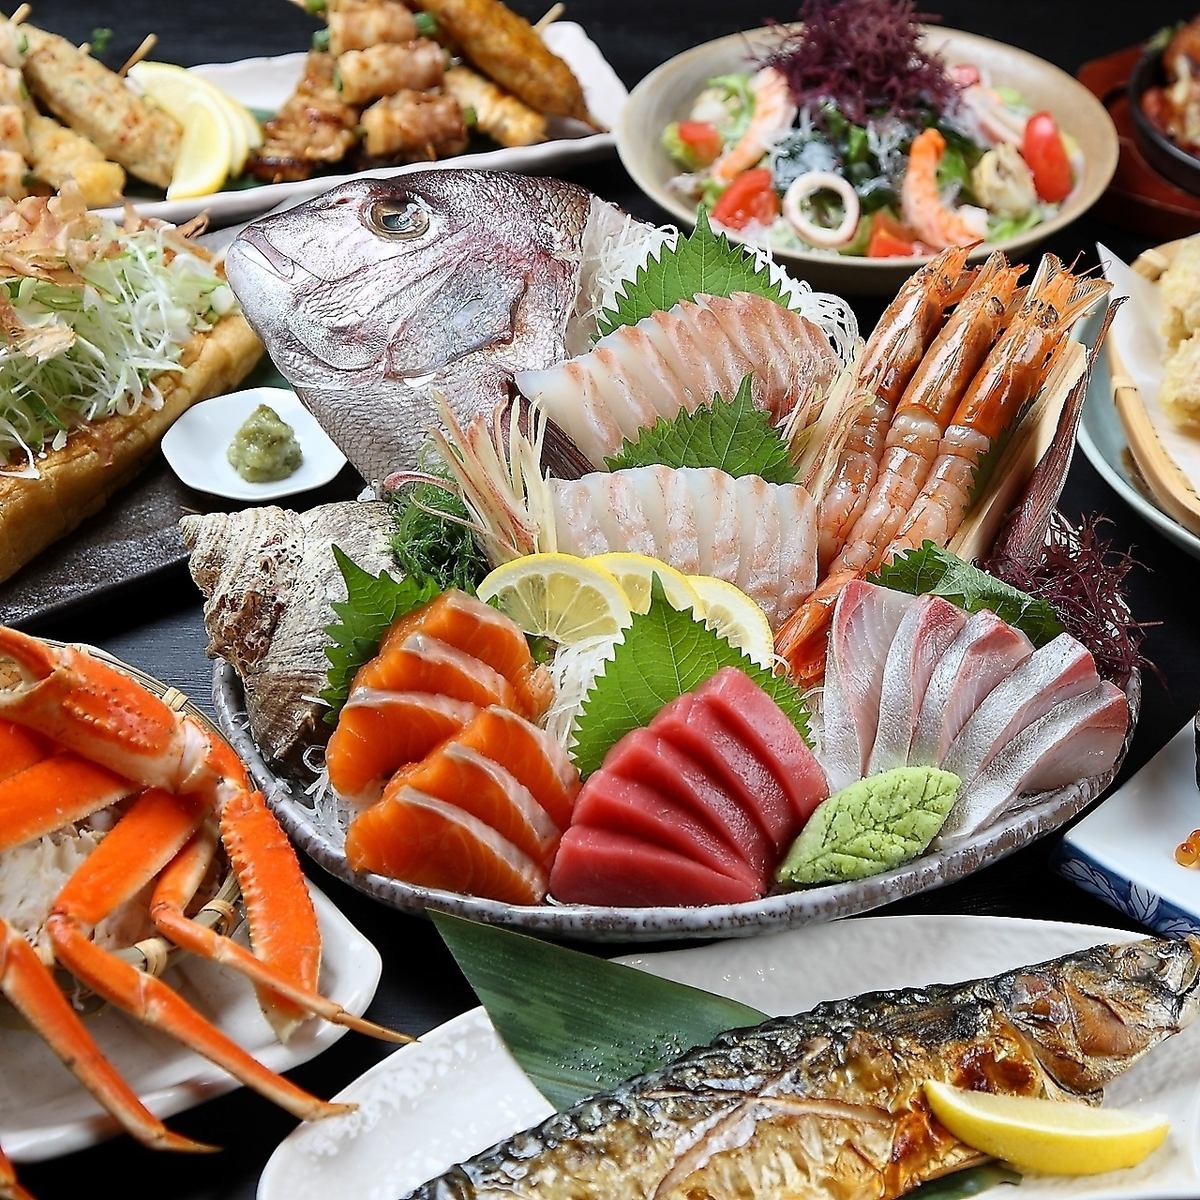 Our specialty is the fresh fish platter, which is made with a focus on freshness and quality.